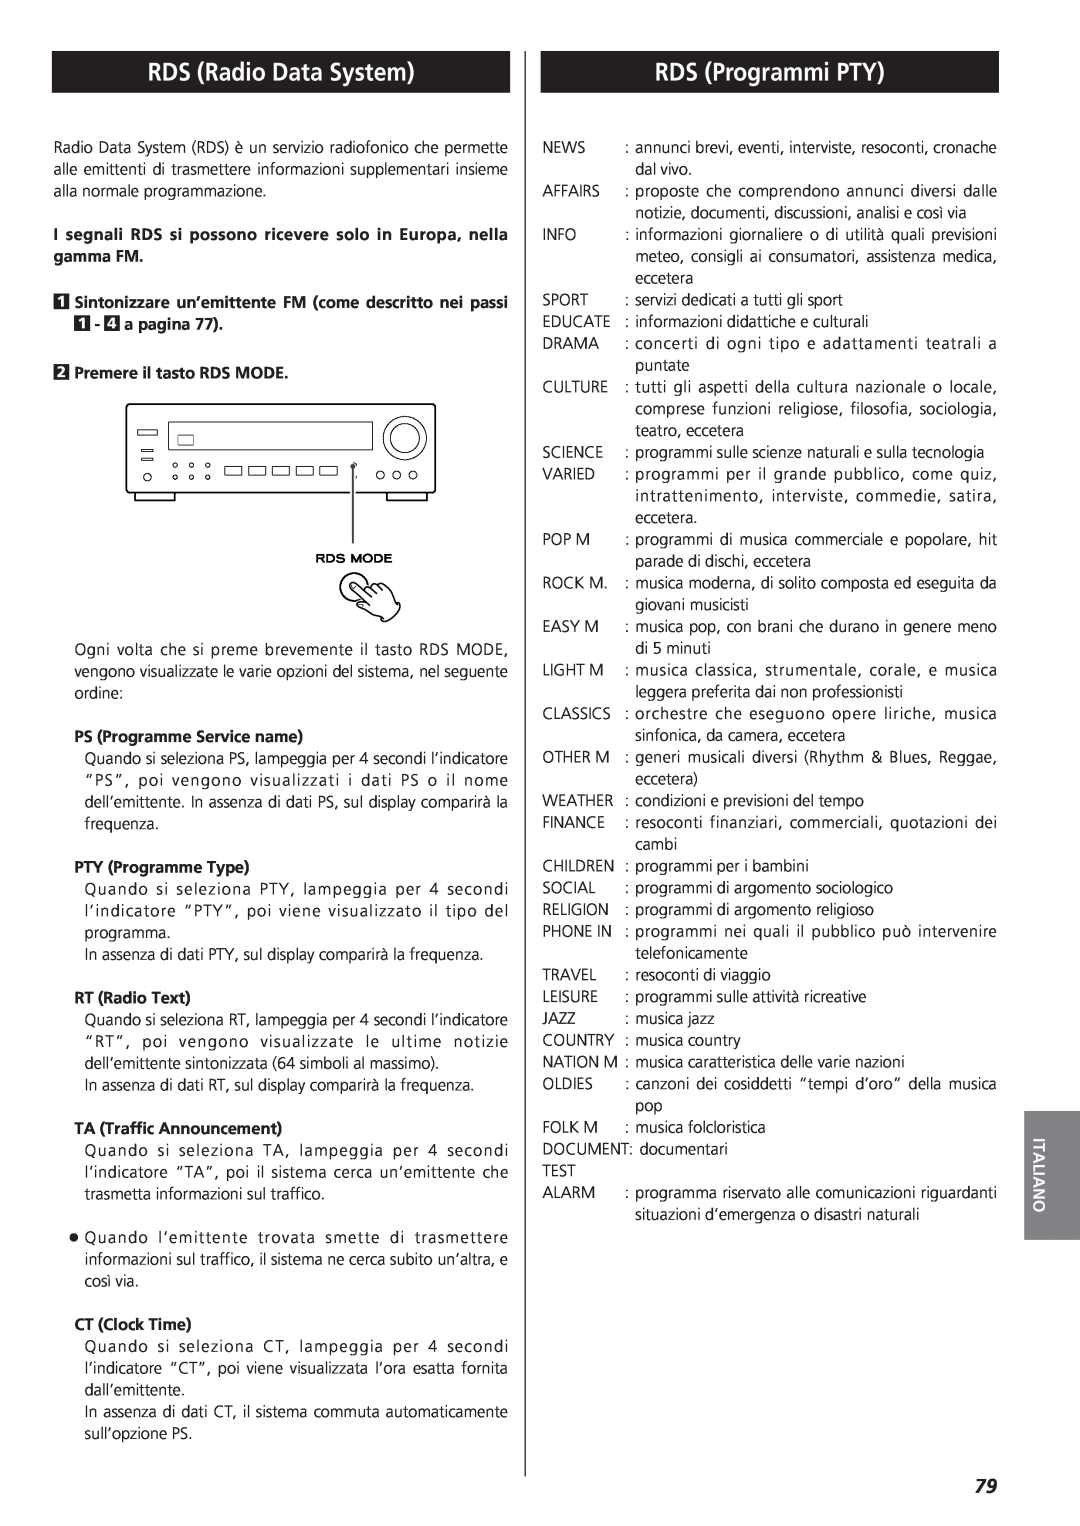 Teac AG-790 RDS Radio Data System, RDS Programmi PTY, 1- 4 a pagina 2Premere il tasto RDS MODE, PS Programme Service name 